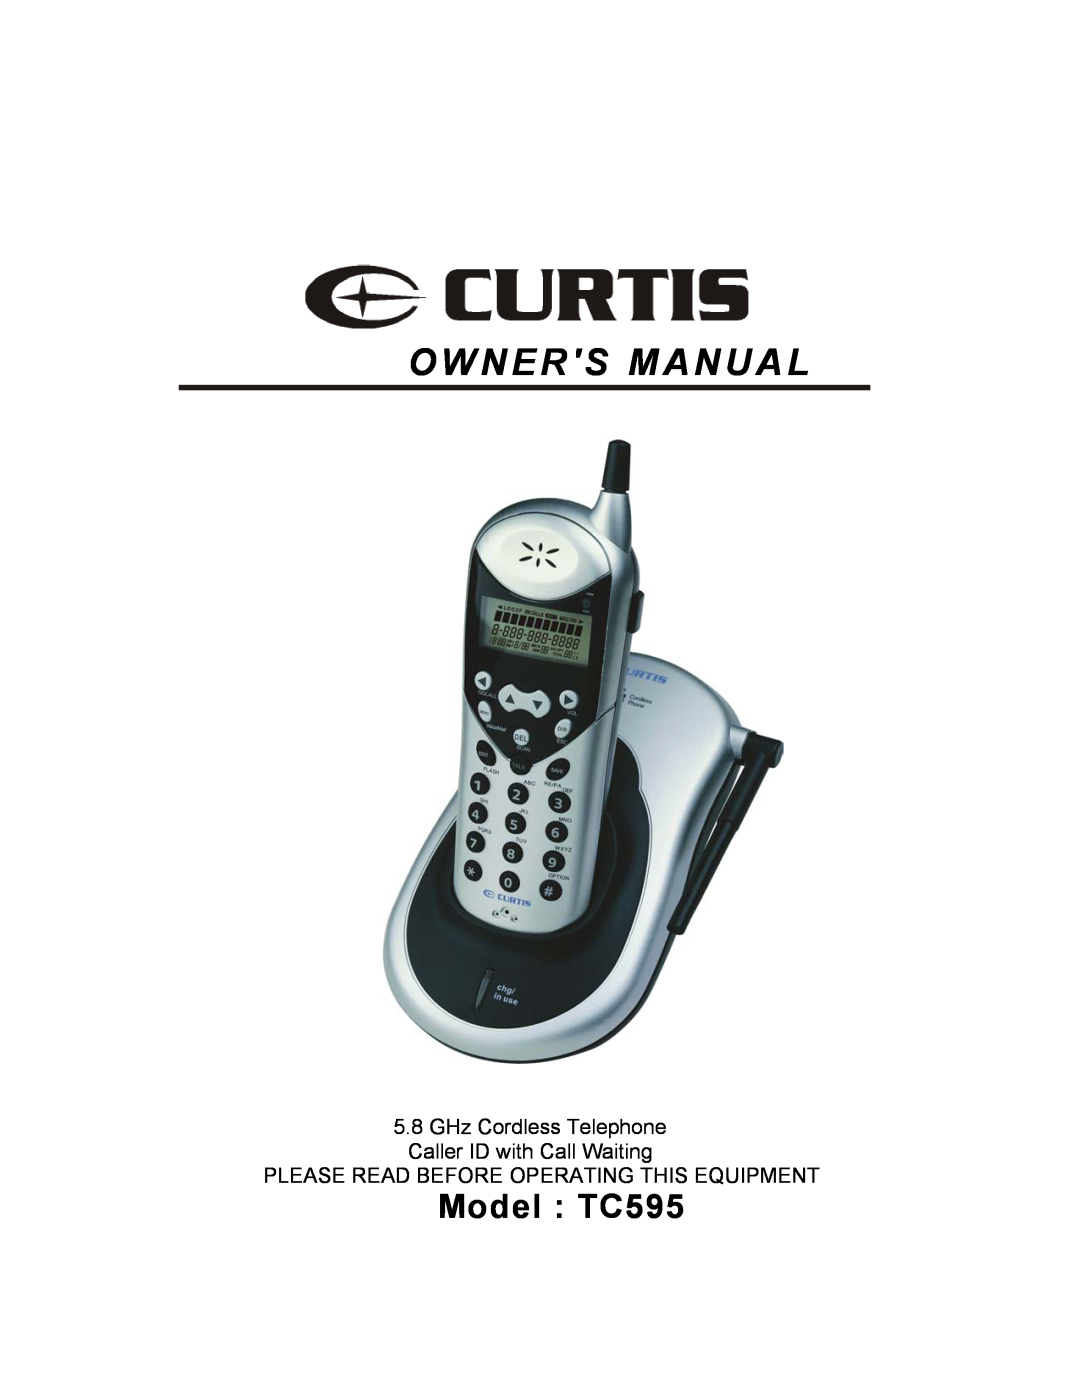 Curtis owner manual Owners Manual, Model TC595, GHz Cordless Telephone Caller ID with Call Waiting 